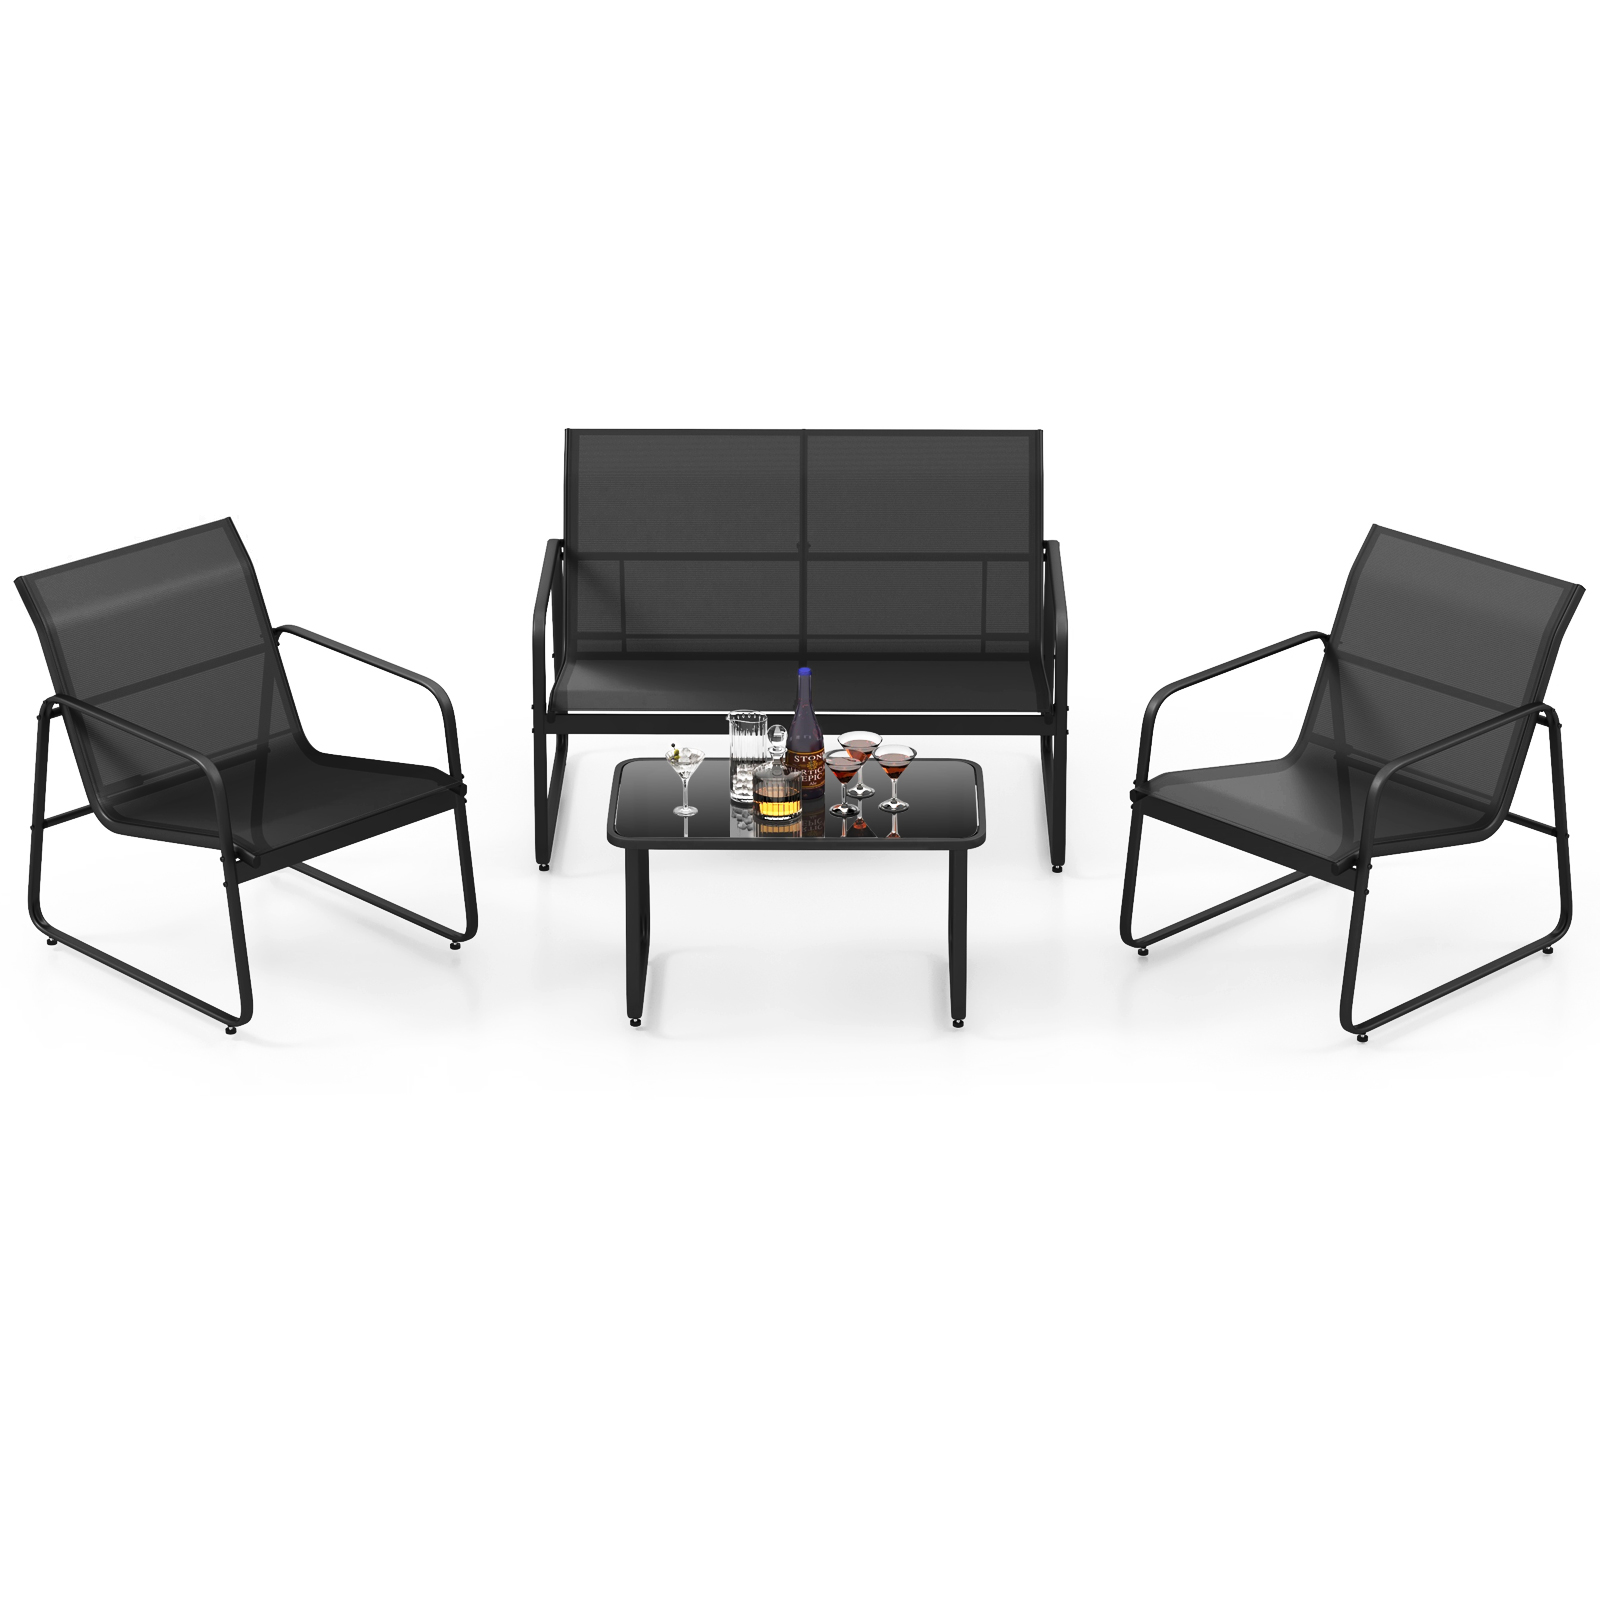 4 Pieces Patio Furniture Set with Tempered Glass Coffee Table-Black